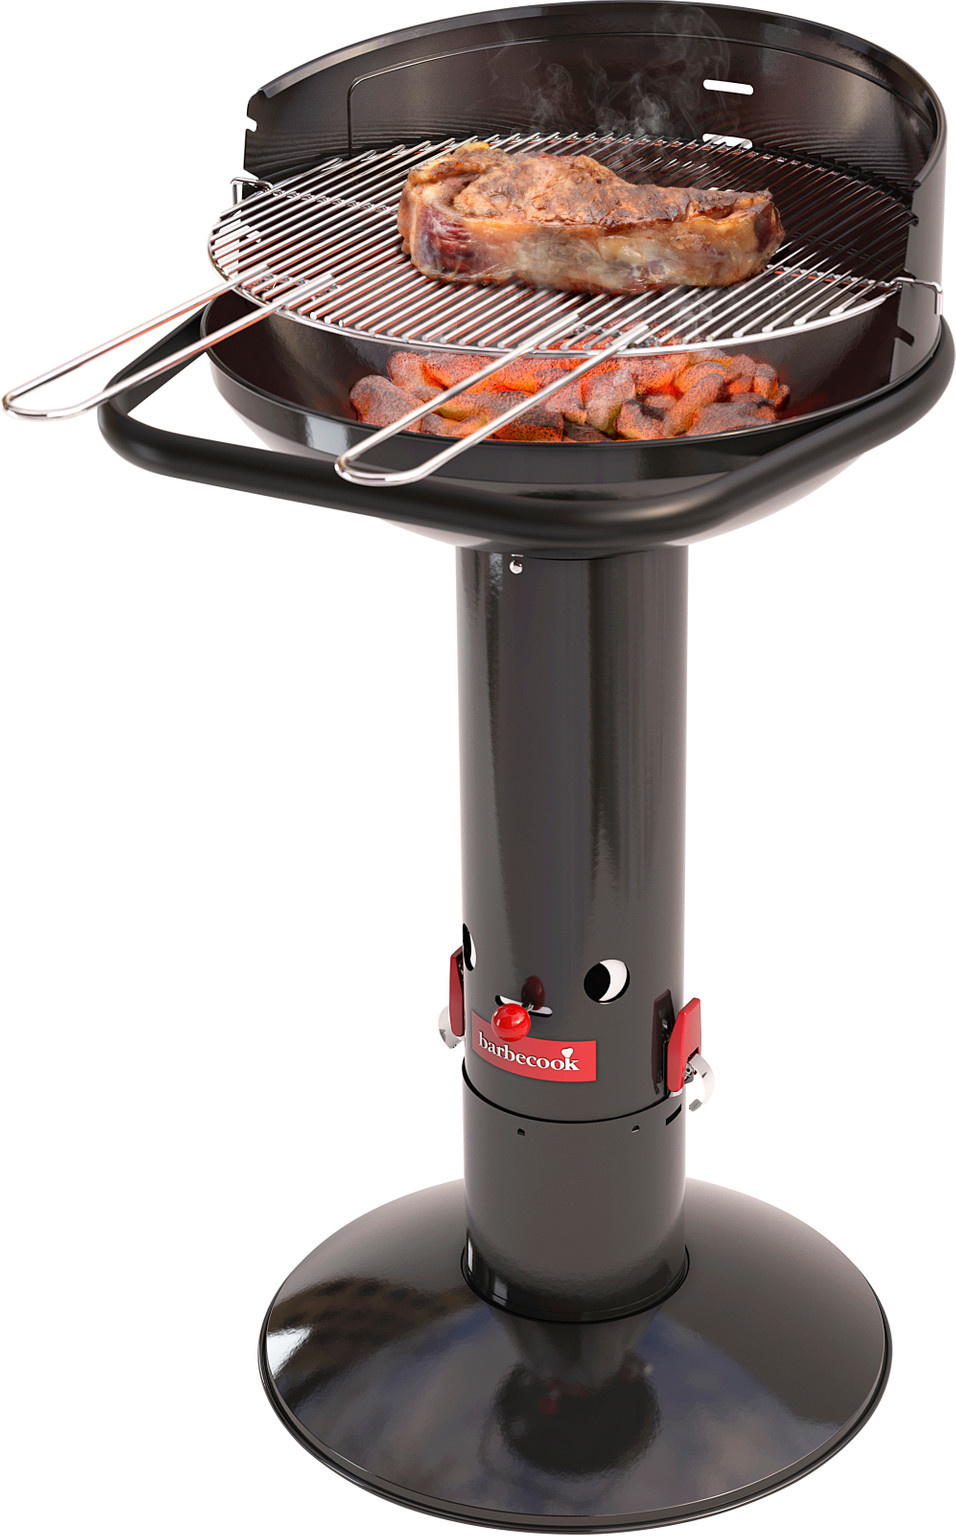 Barbecook 45 Barbecue - Urban Gardening Store